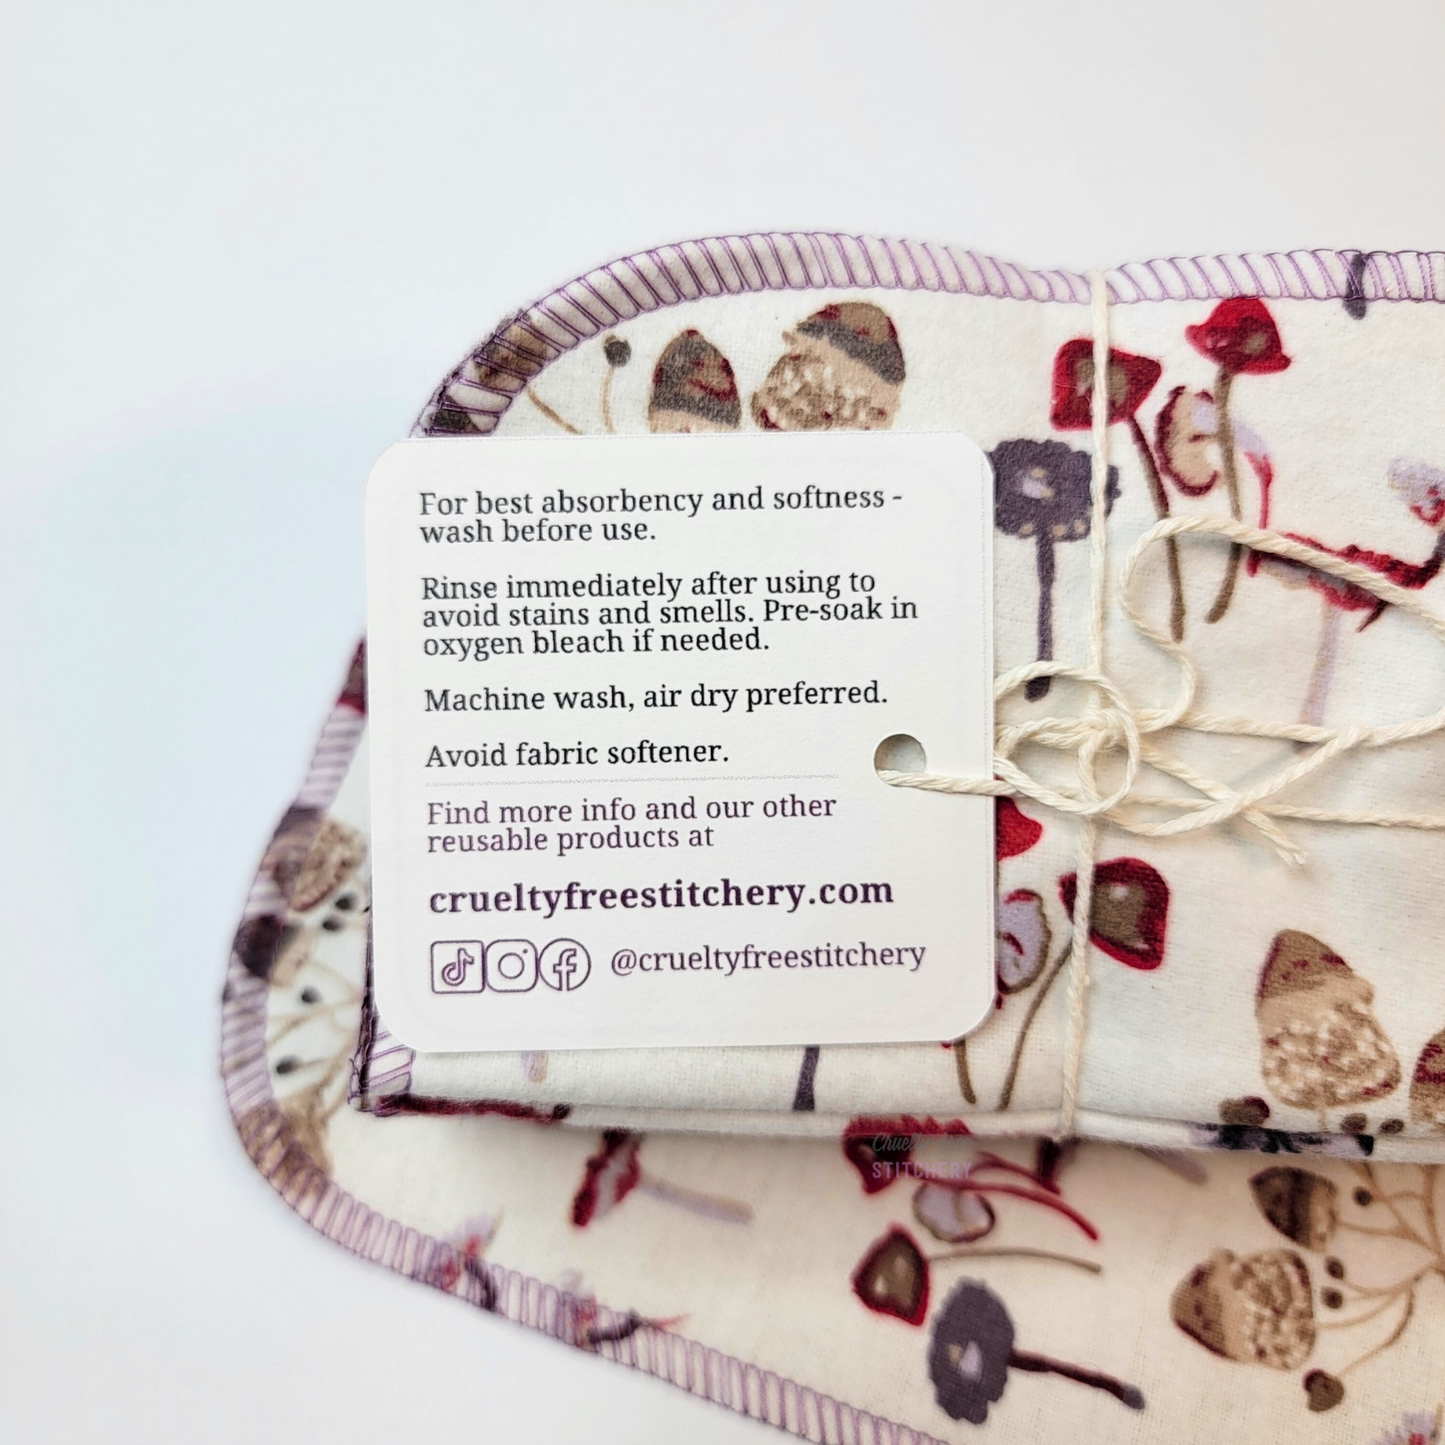 The back of the tag with care instructions and our contact info. Details can be found in the item description.